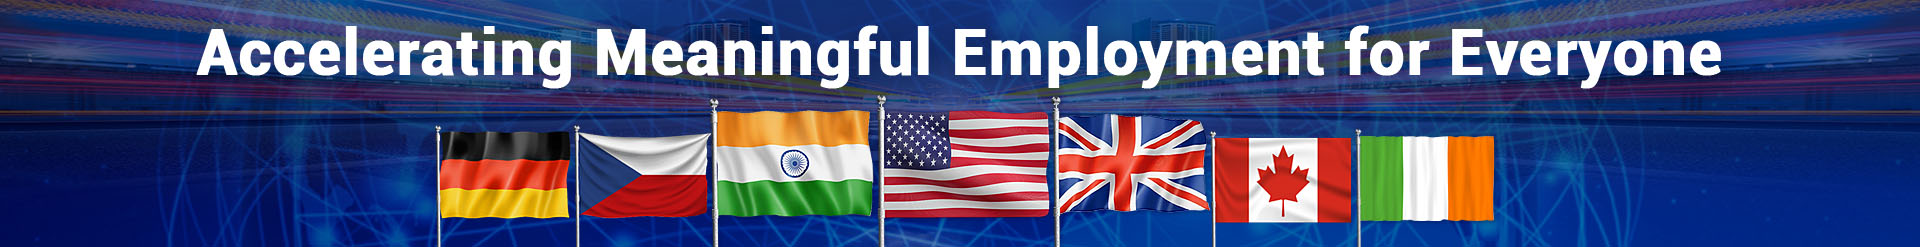 Representing Rangam’s global presence with the flags of Germany, Czechia, India, U.S., U.K., and Ireland titled Accelerating Meaningful Employment With Everyone